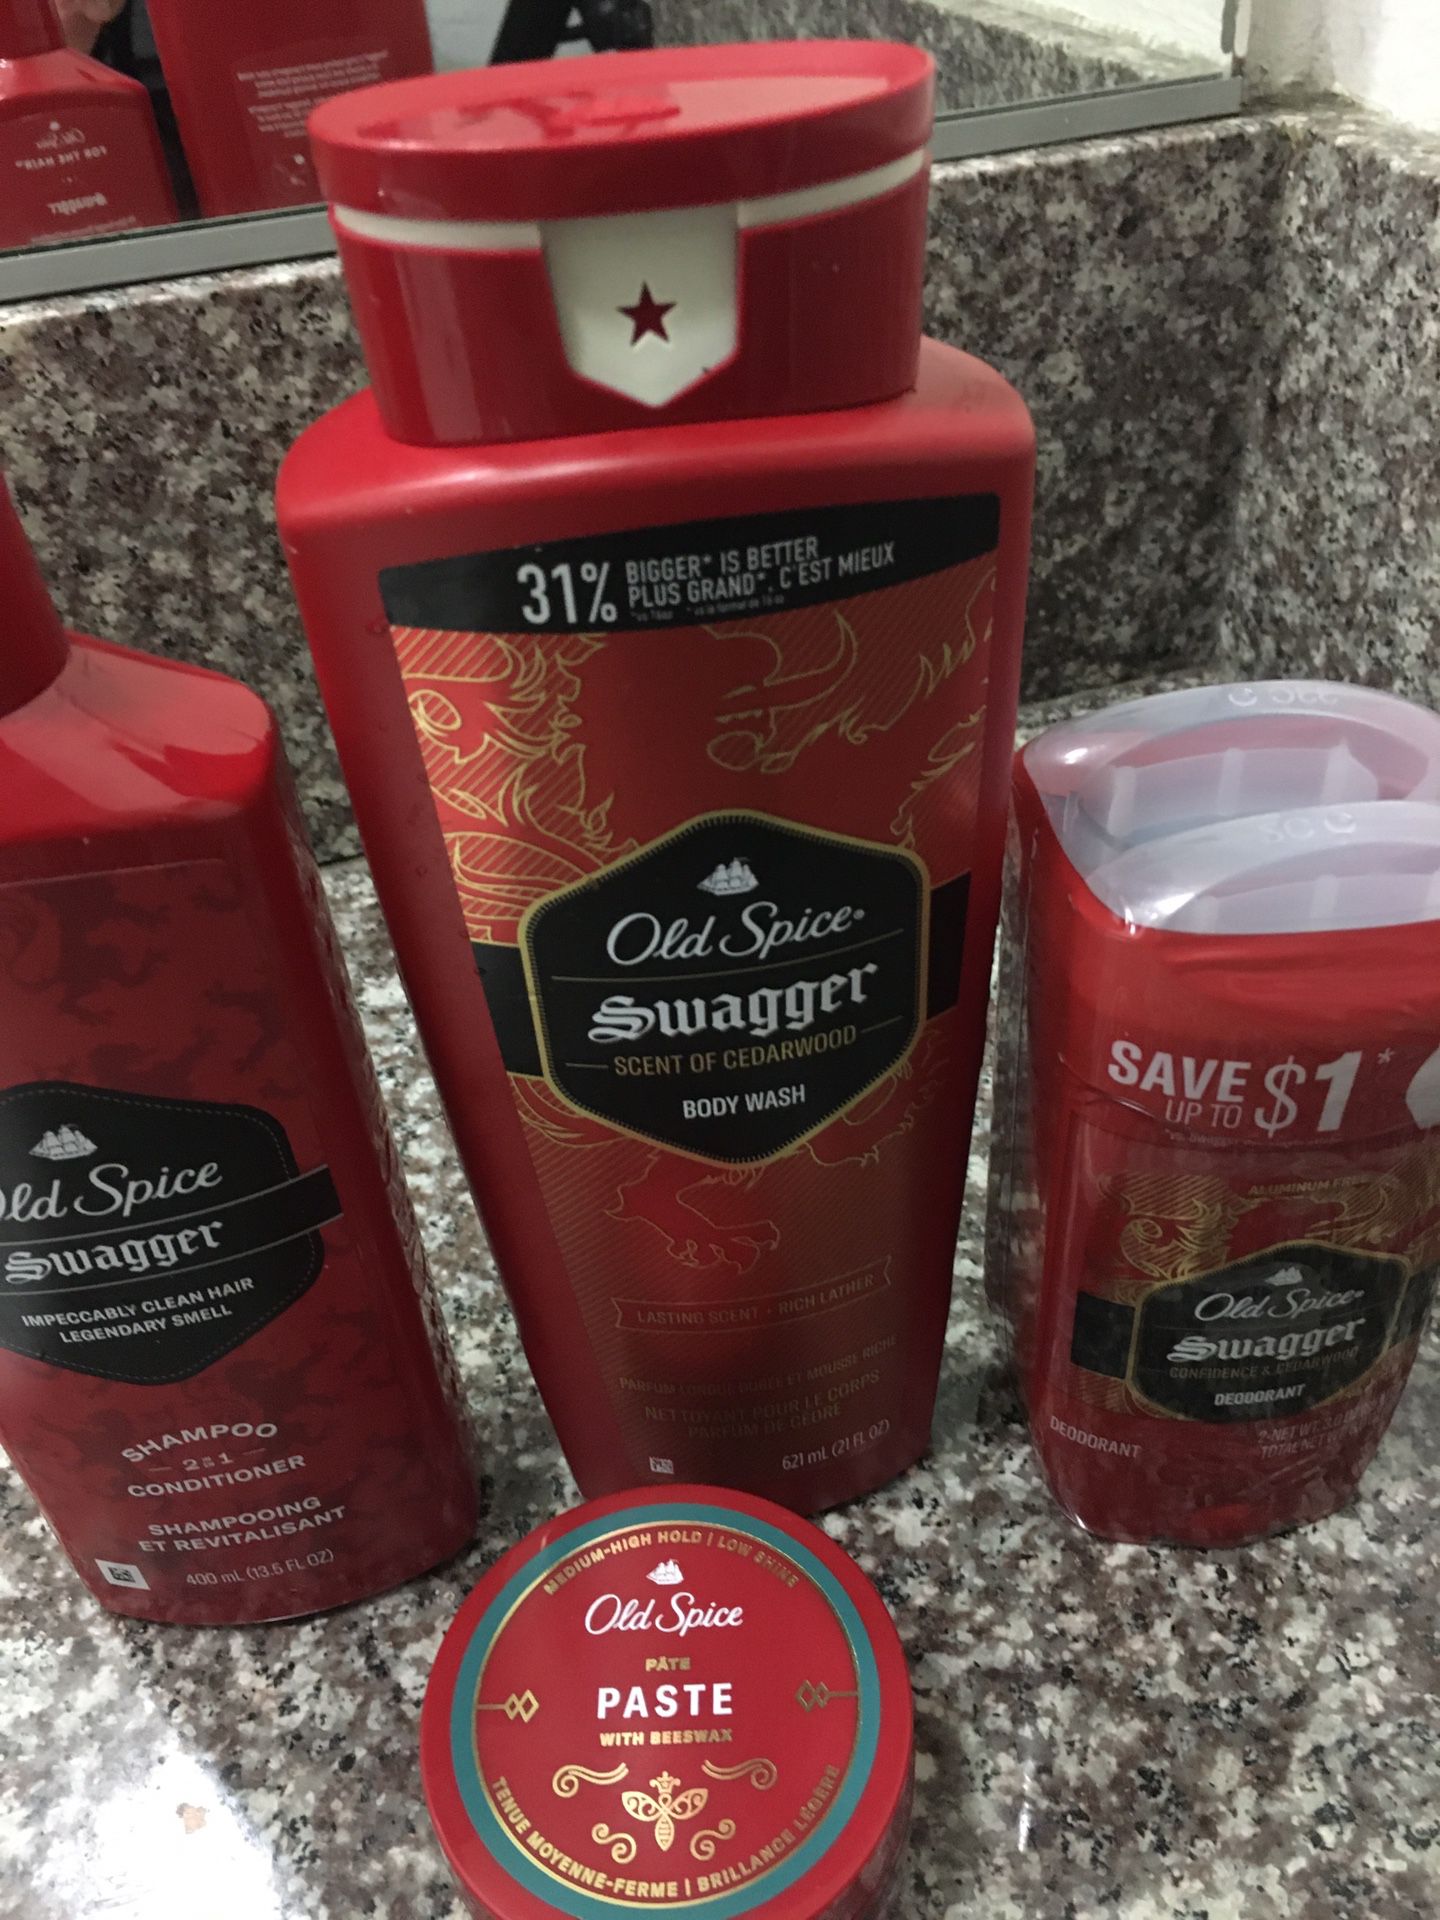 Old Spice Swagger Cosmetic Bundle!!!